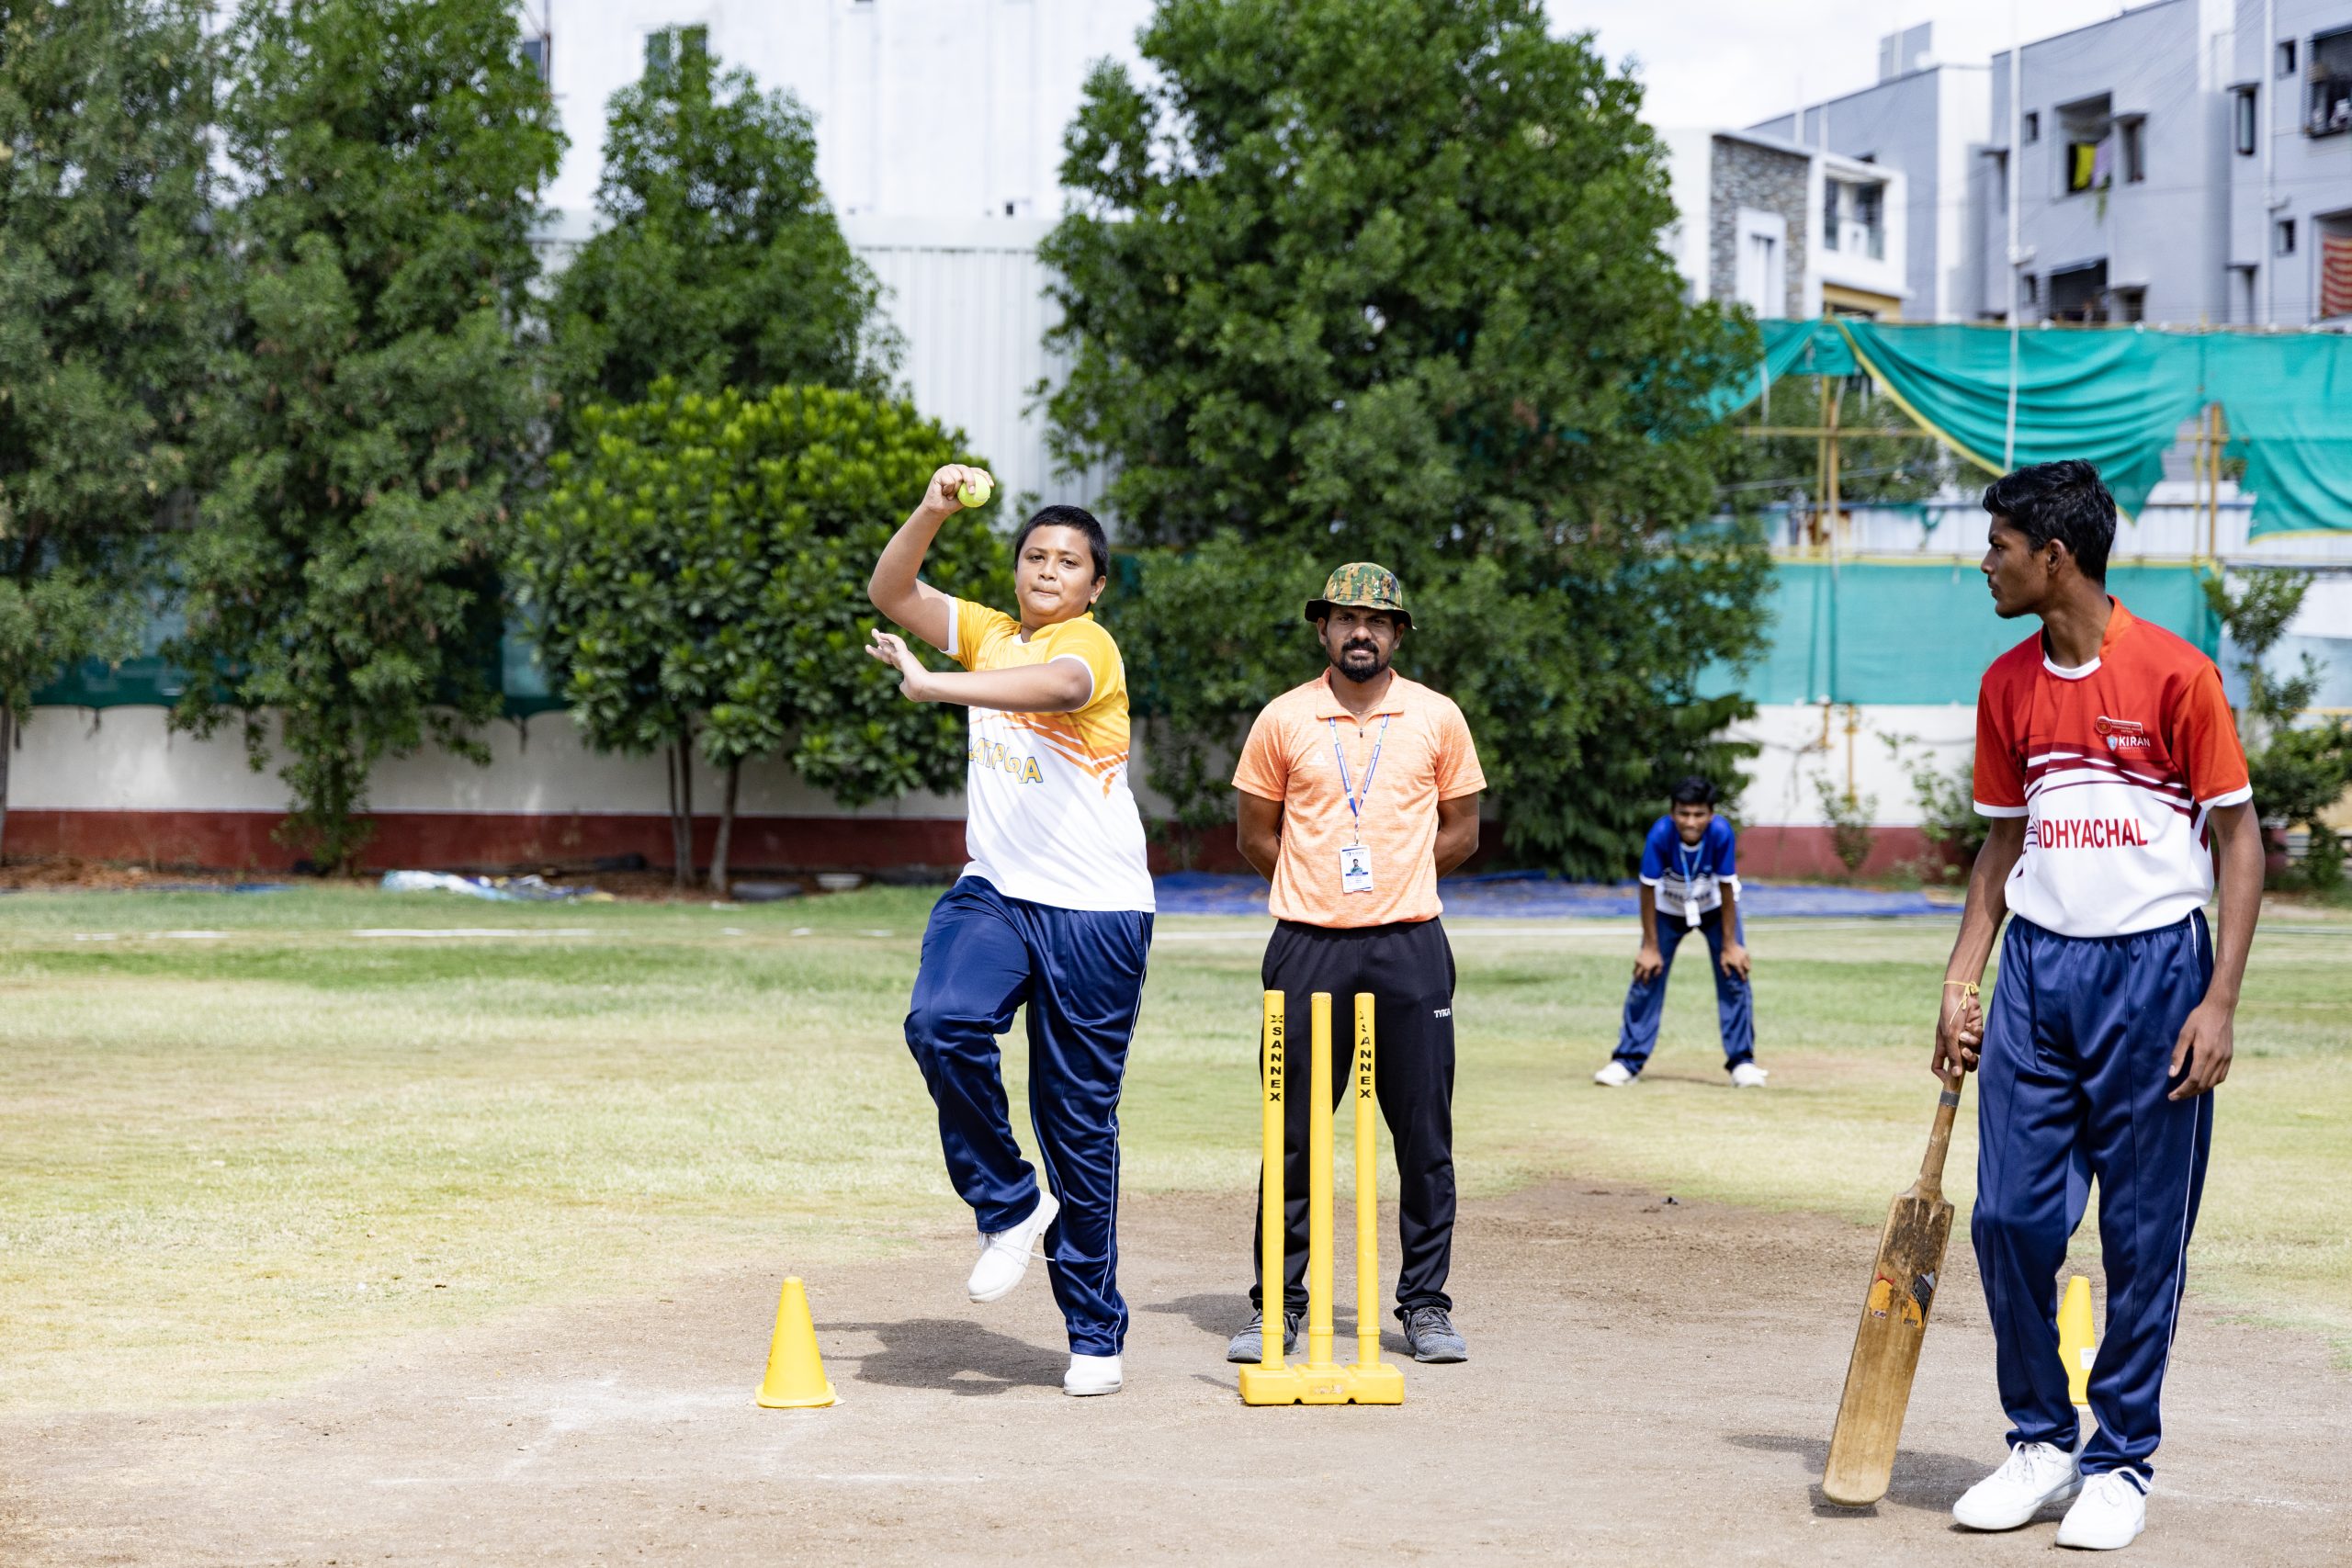 Energetic students actively engaged in a friendly game of cricket at Kiran International School, demonstrating teamwork and sporting spirit on a sunny day.